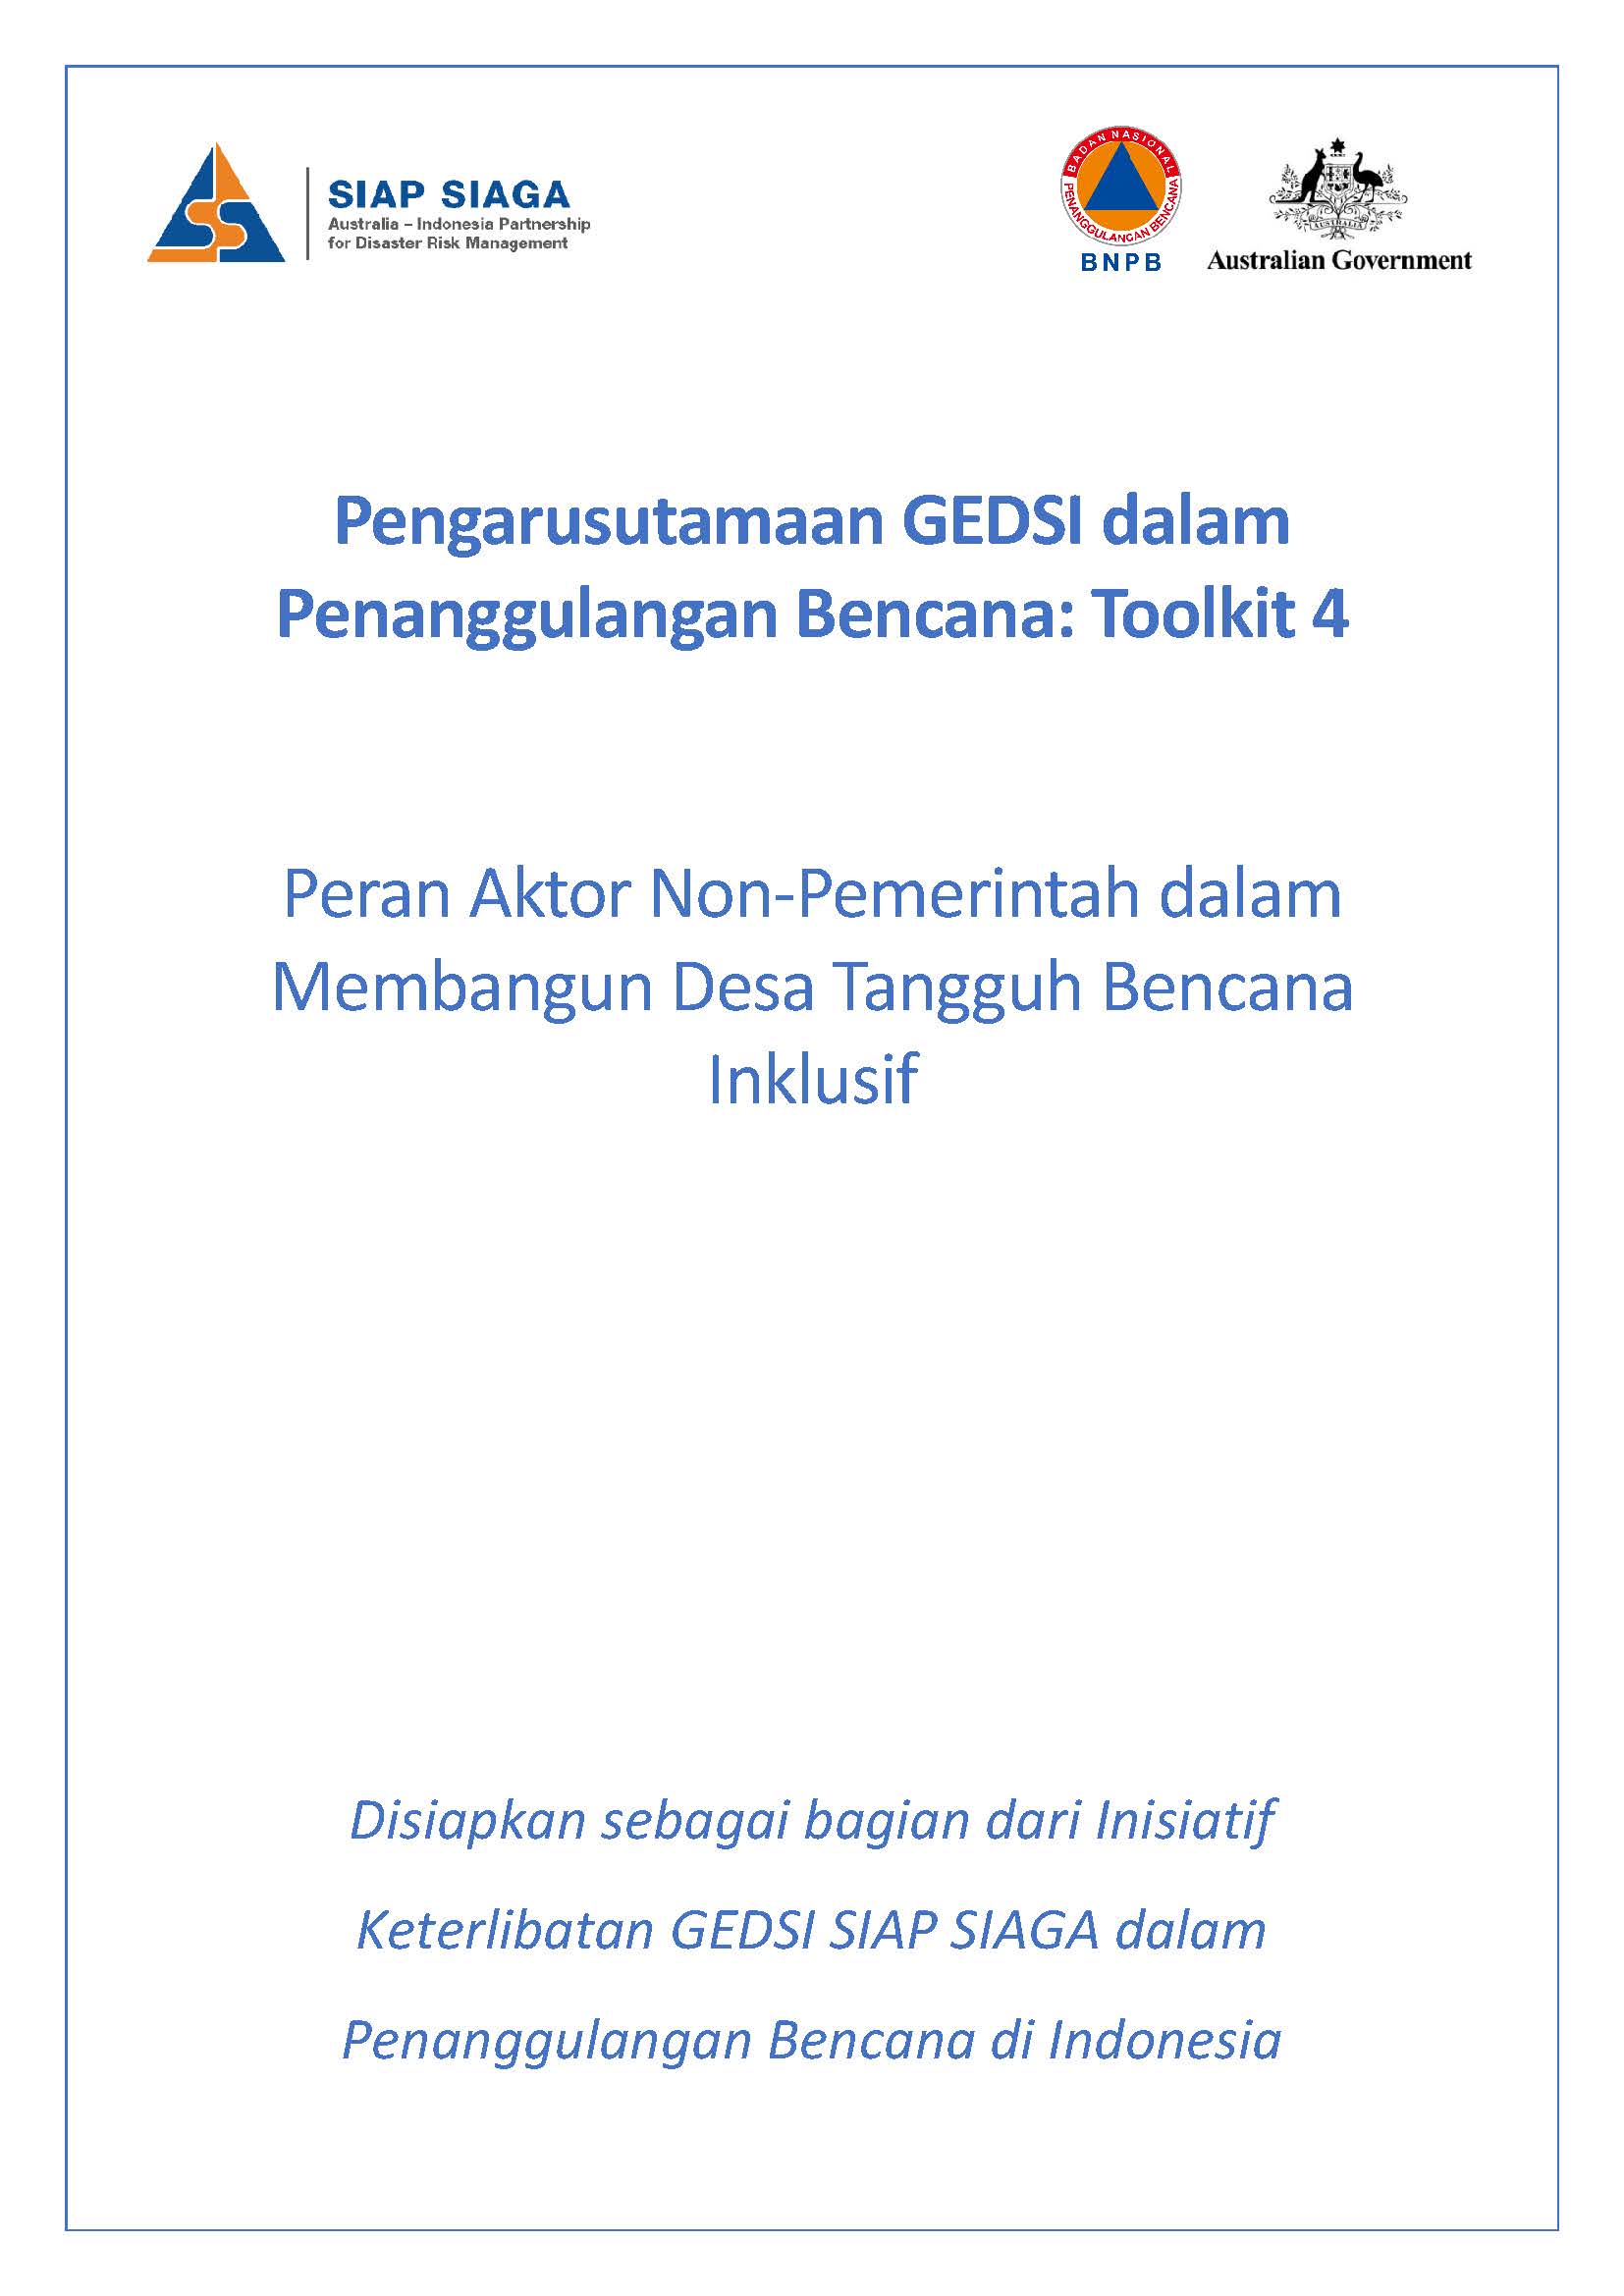 GEDSI Mainstreaming in Disaster Management: Toolkit 04